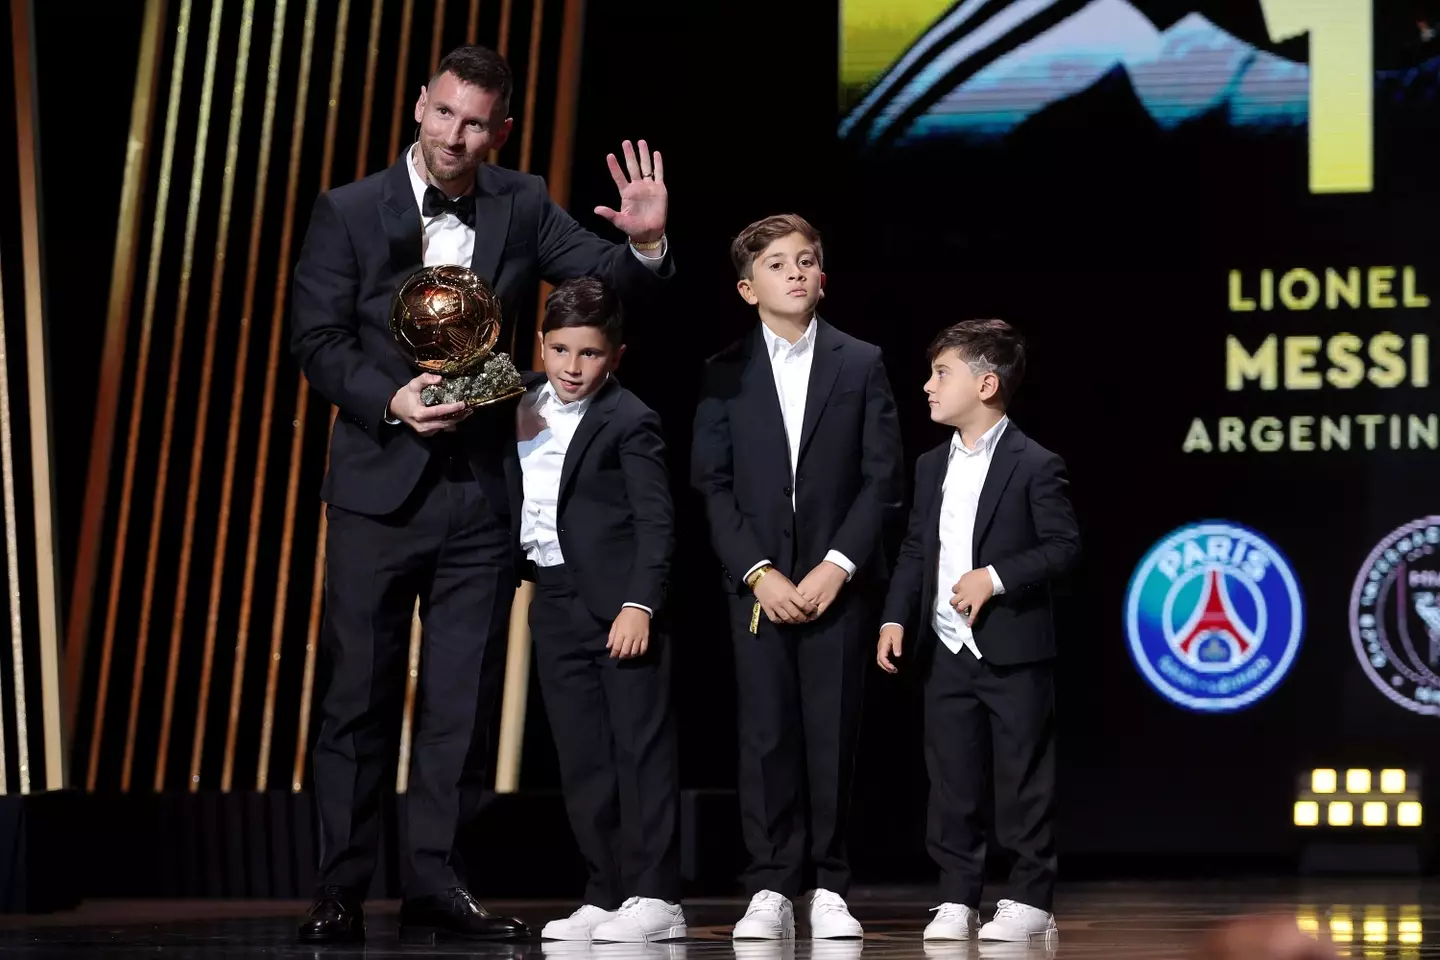 Lionel Messi on stage with his sons. Image: Getty 